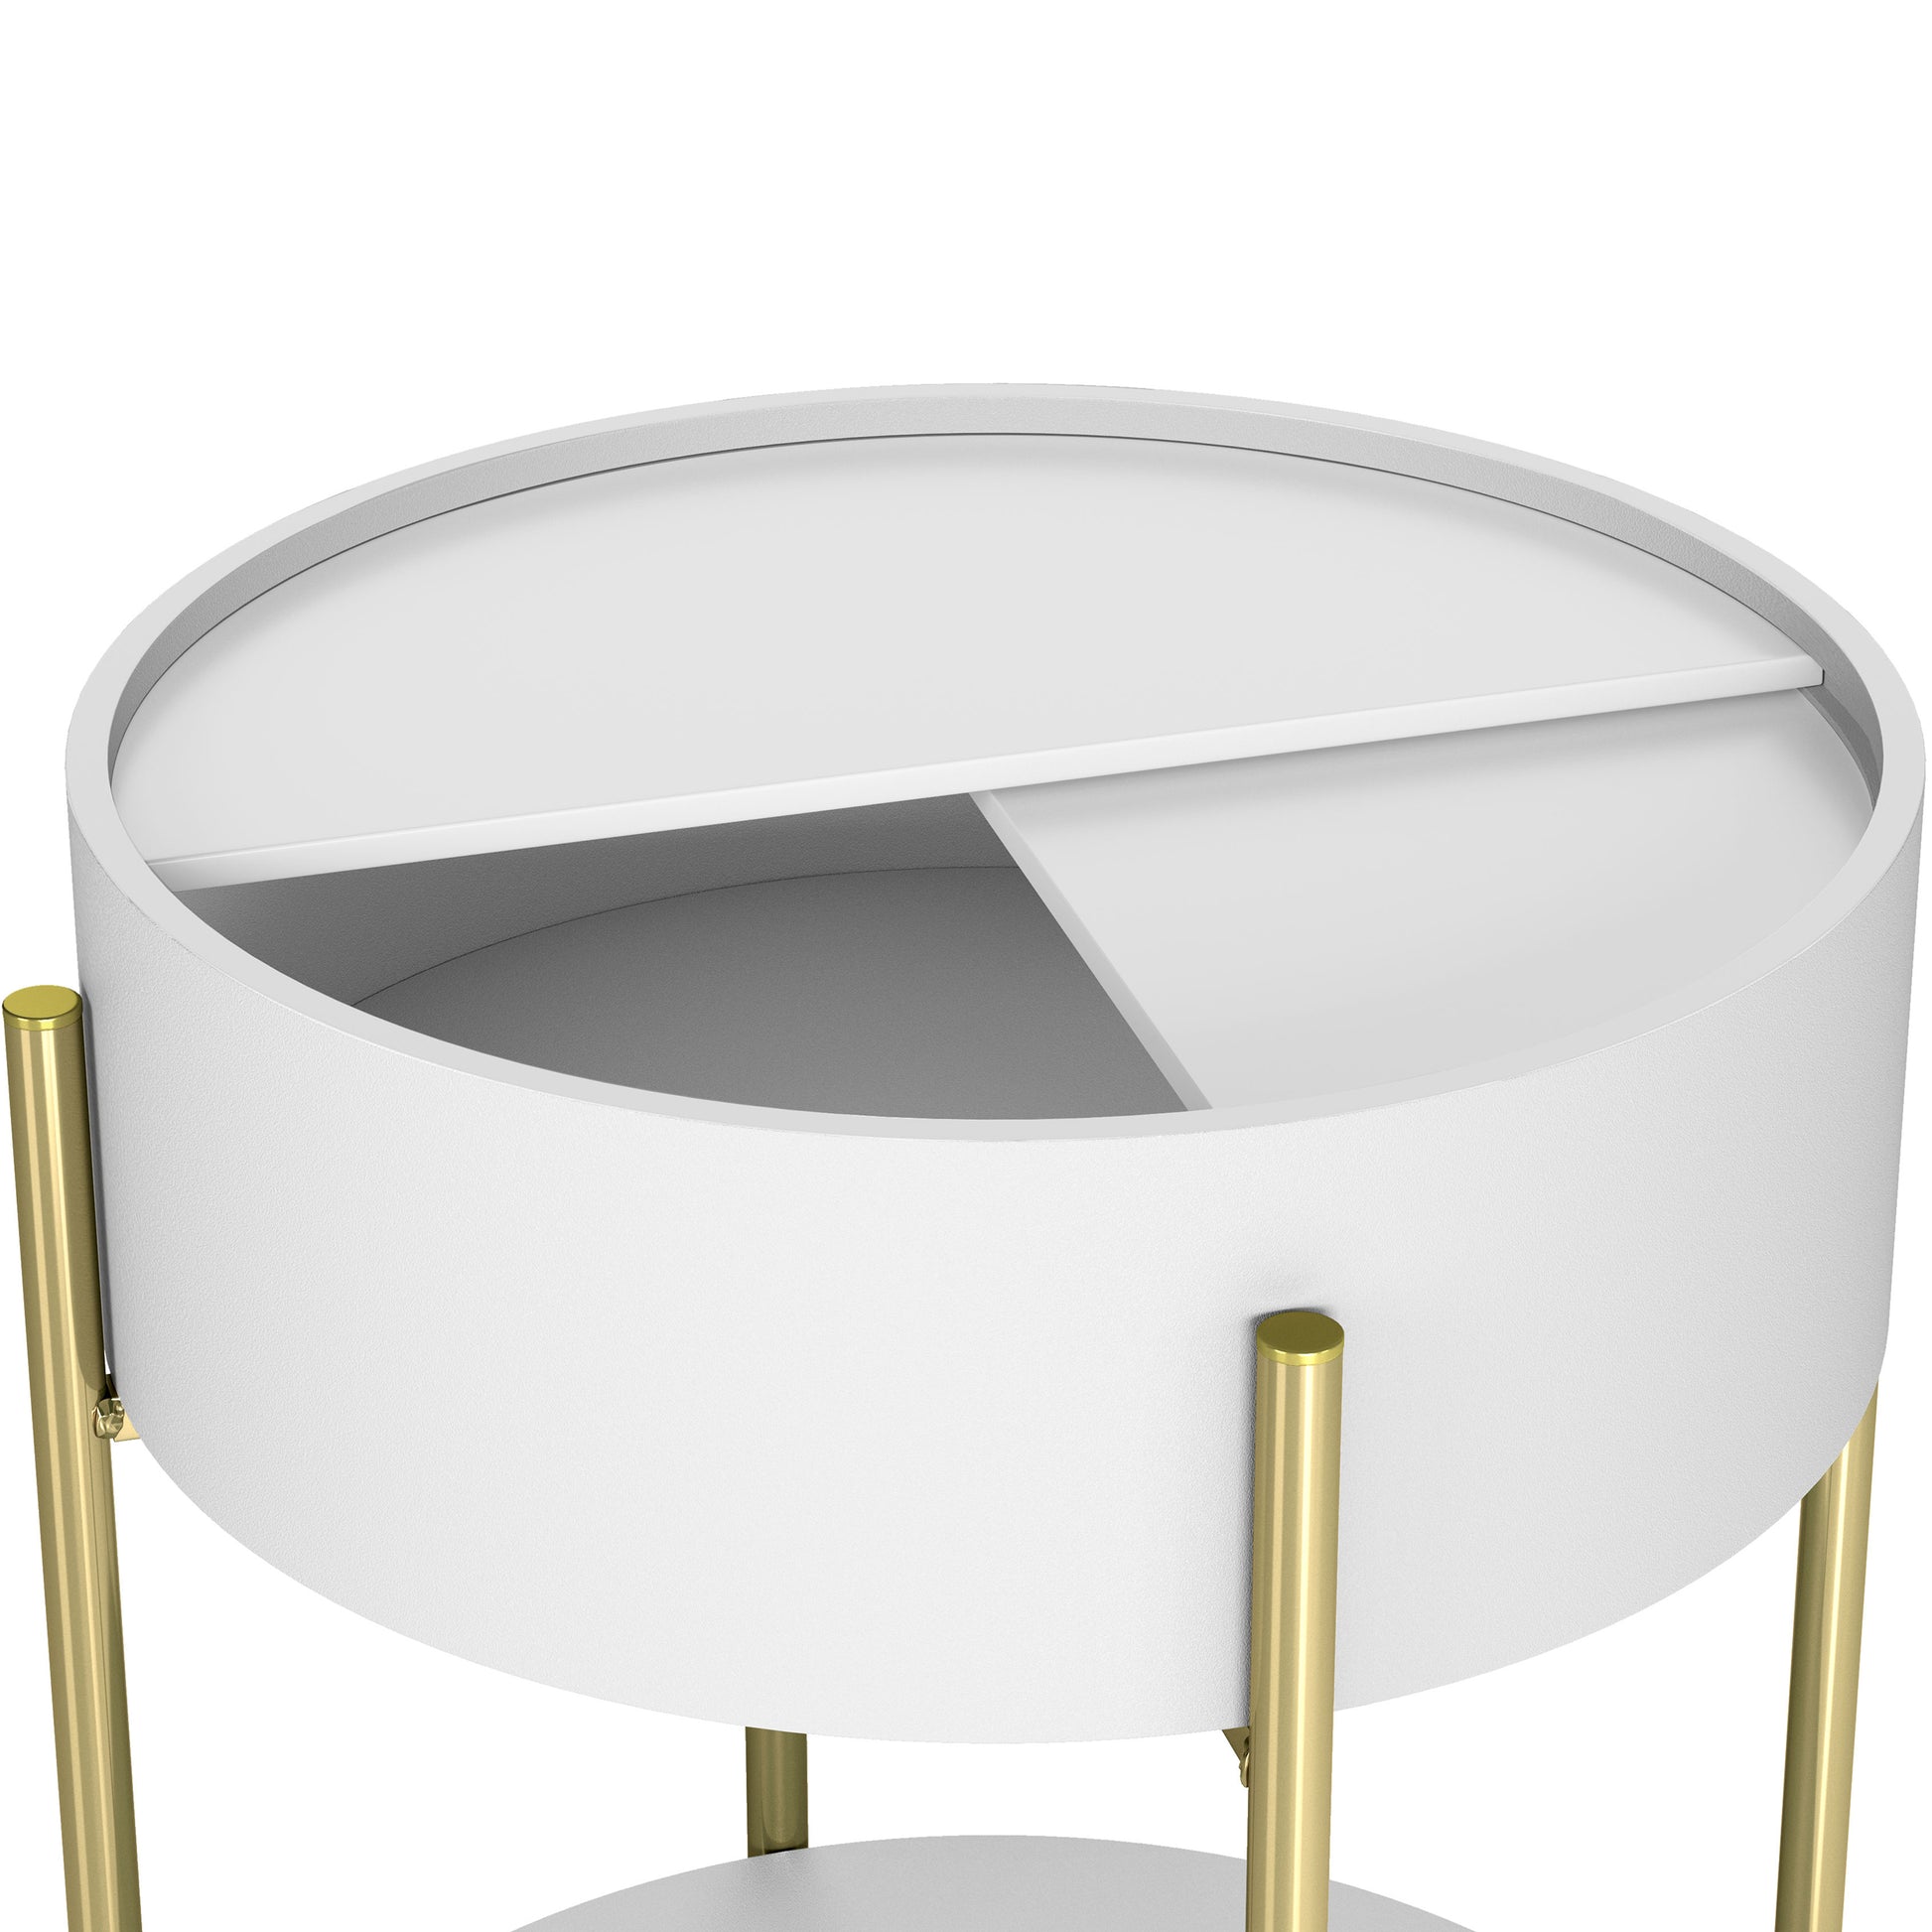 Angled close-up top view of a modern white and gold round storage end table on a white background